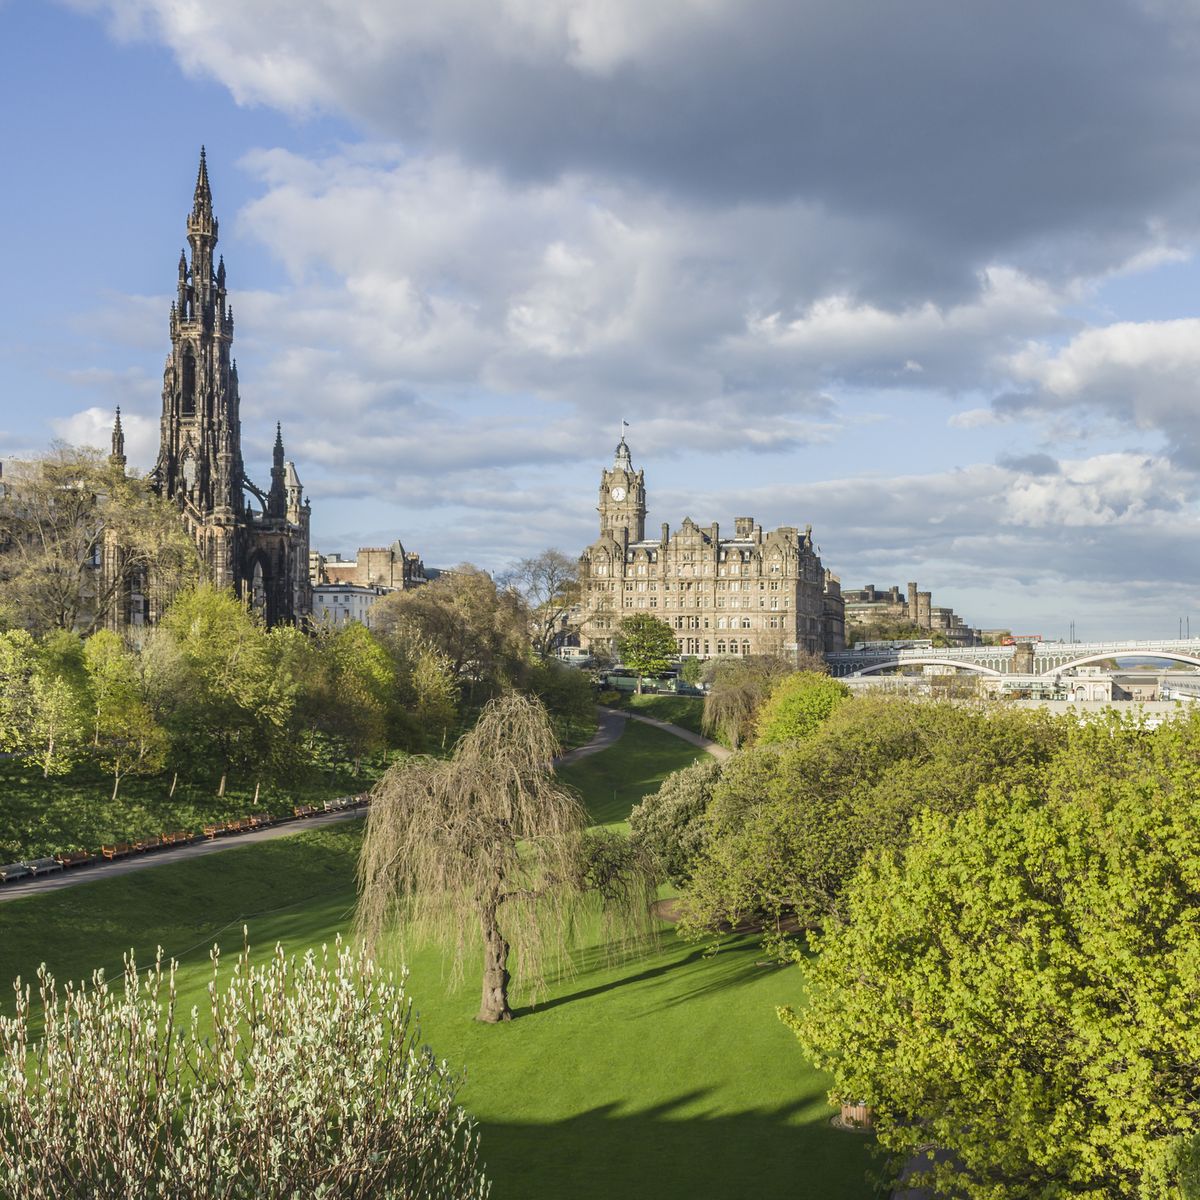 <p>Between all the medieval architecture, charming (and often foggy!) cobblestone streets, and lively traditional pubs, it's impossible not to fall in love with Edinburgh. Get lost wandering through the windy roads in Scotland for a nostalgic adventure.</p><p><a class="body-btn-link" href="https://go.redirectingat.com?id=74968X1553576&url=https%3A%2F%2Fwww.tripadvisor.com%2FHotel_Review-g186525-d191461-Reviews-The_Dunstane_Houses-Edinburgh_Scotland.html&sref=https%3A%2F%2Fwww.elledecor.com%2Fpromotions%2Fg45308430%2Fbeautiful-cities-to-visit%2F">Shop Now</a> <strong><em>The Dunstane Houses</em></strong></p>